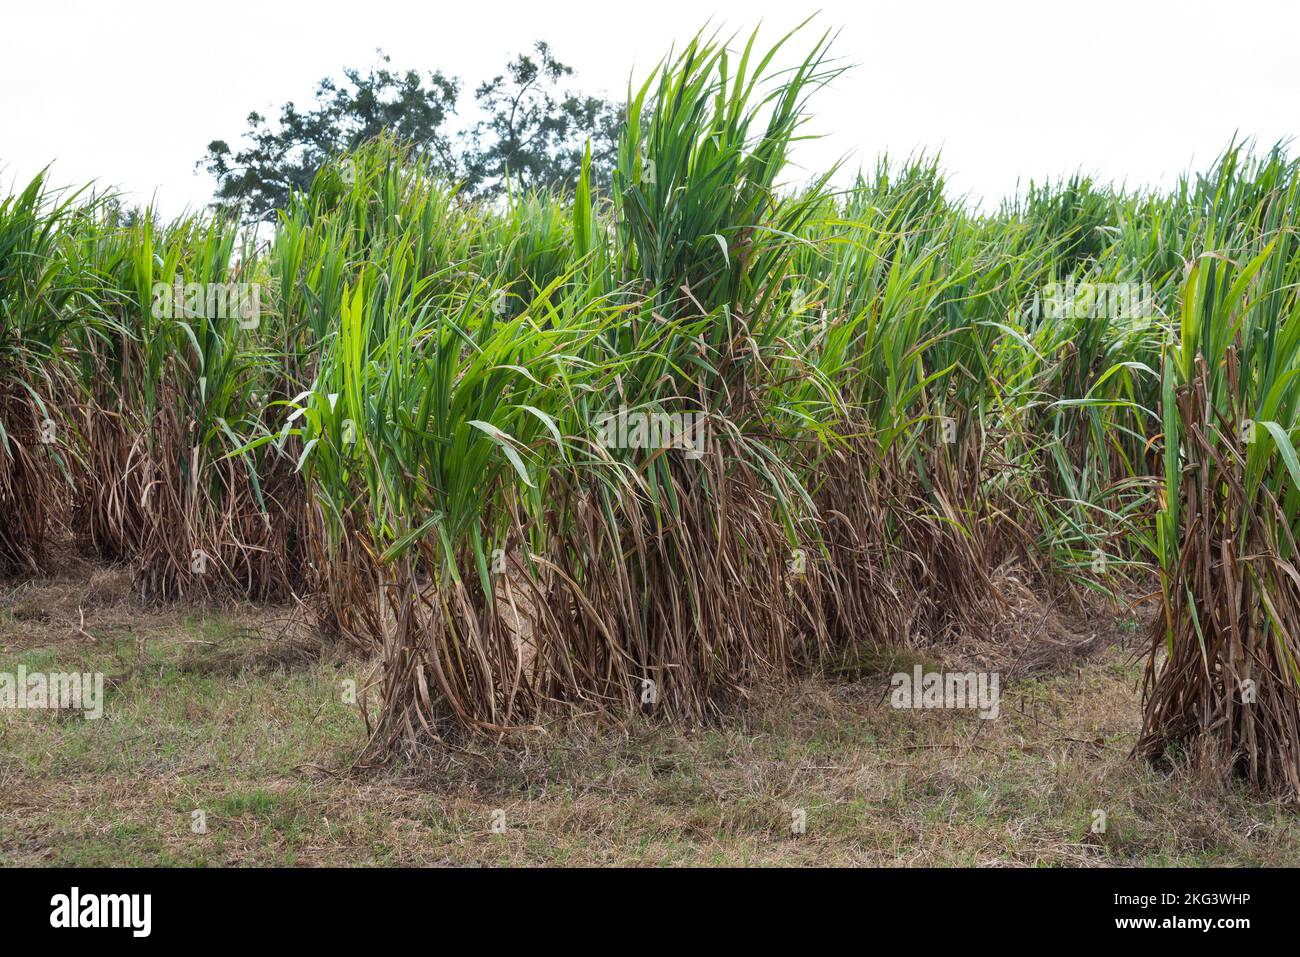 Elephant Grass or Pennesetum Purpureum is growing in North Central Florida as an experimental and renewable source of biomass energy. Stock Photo